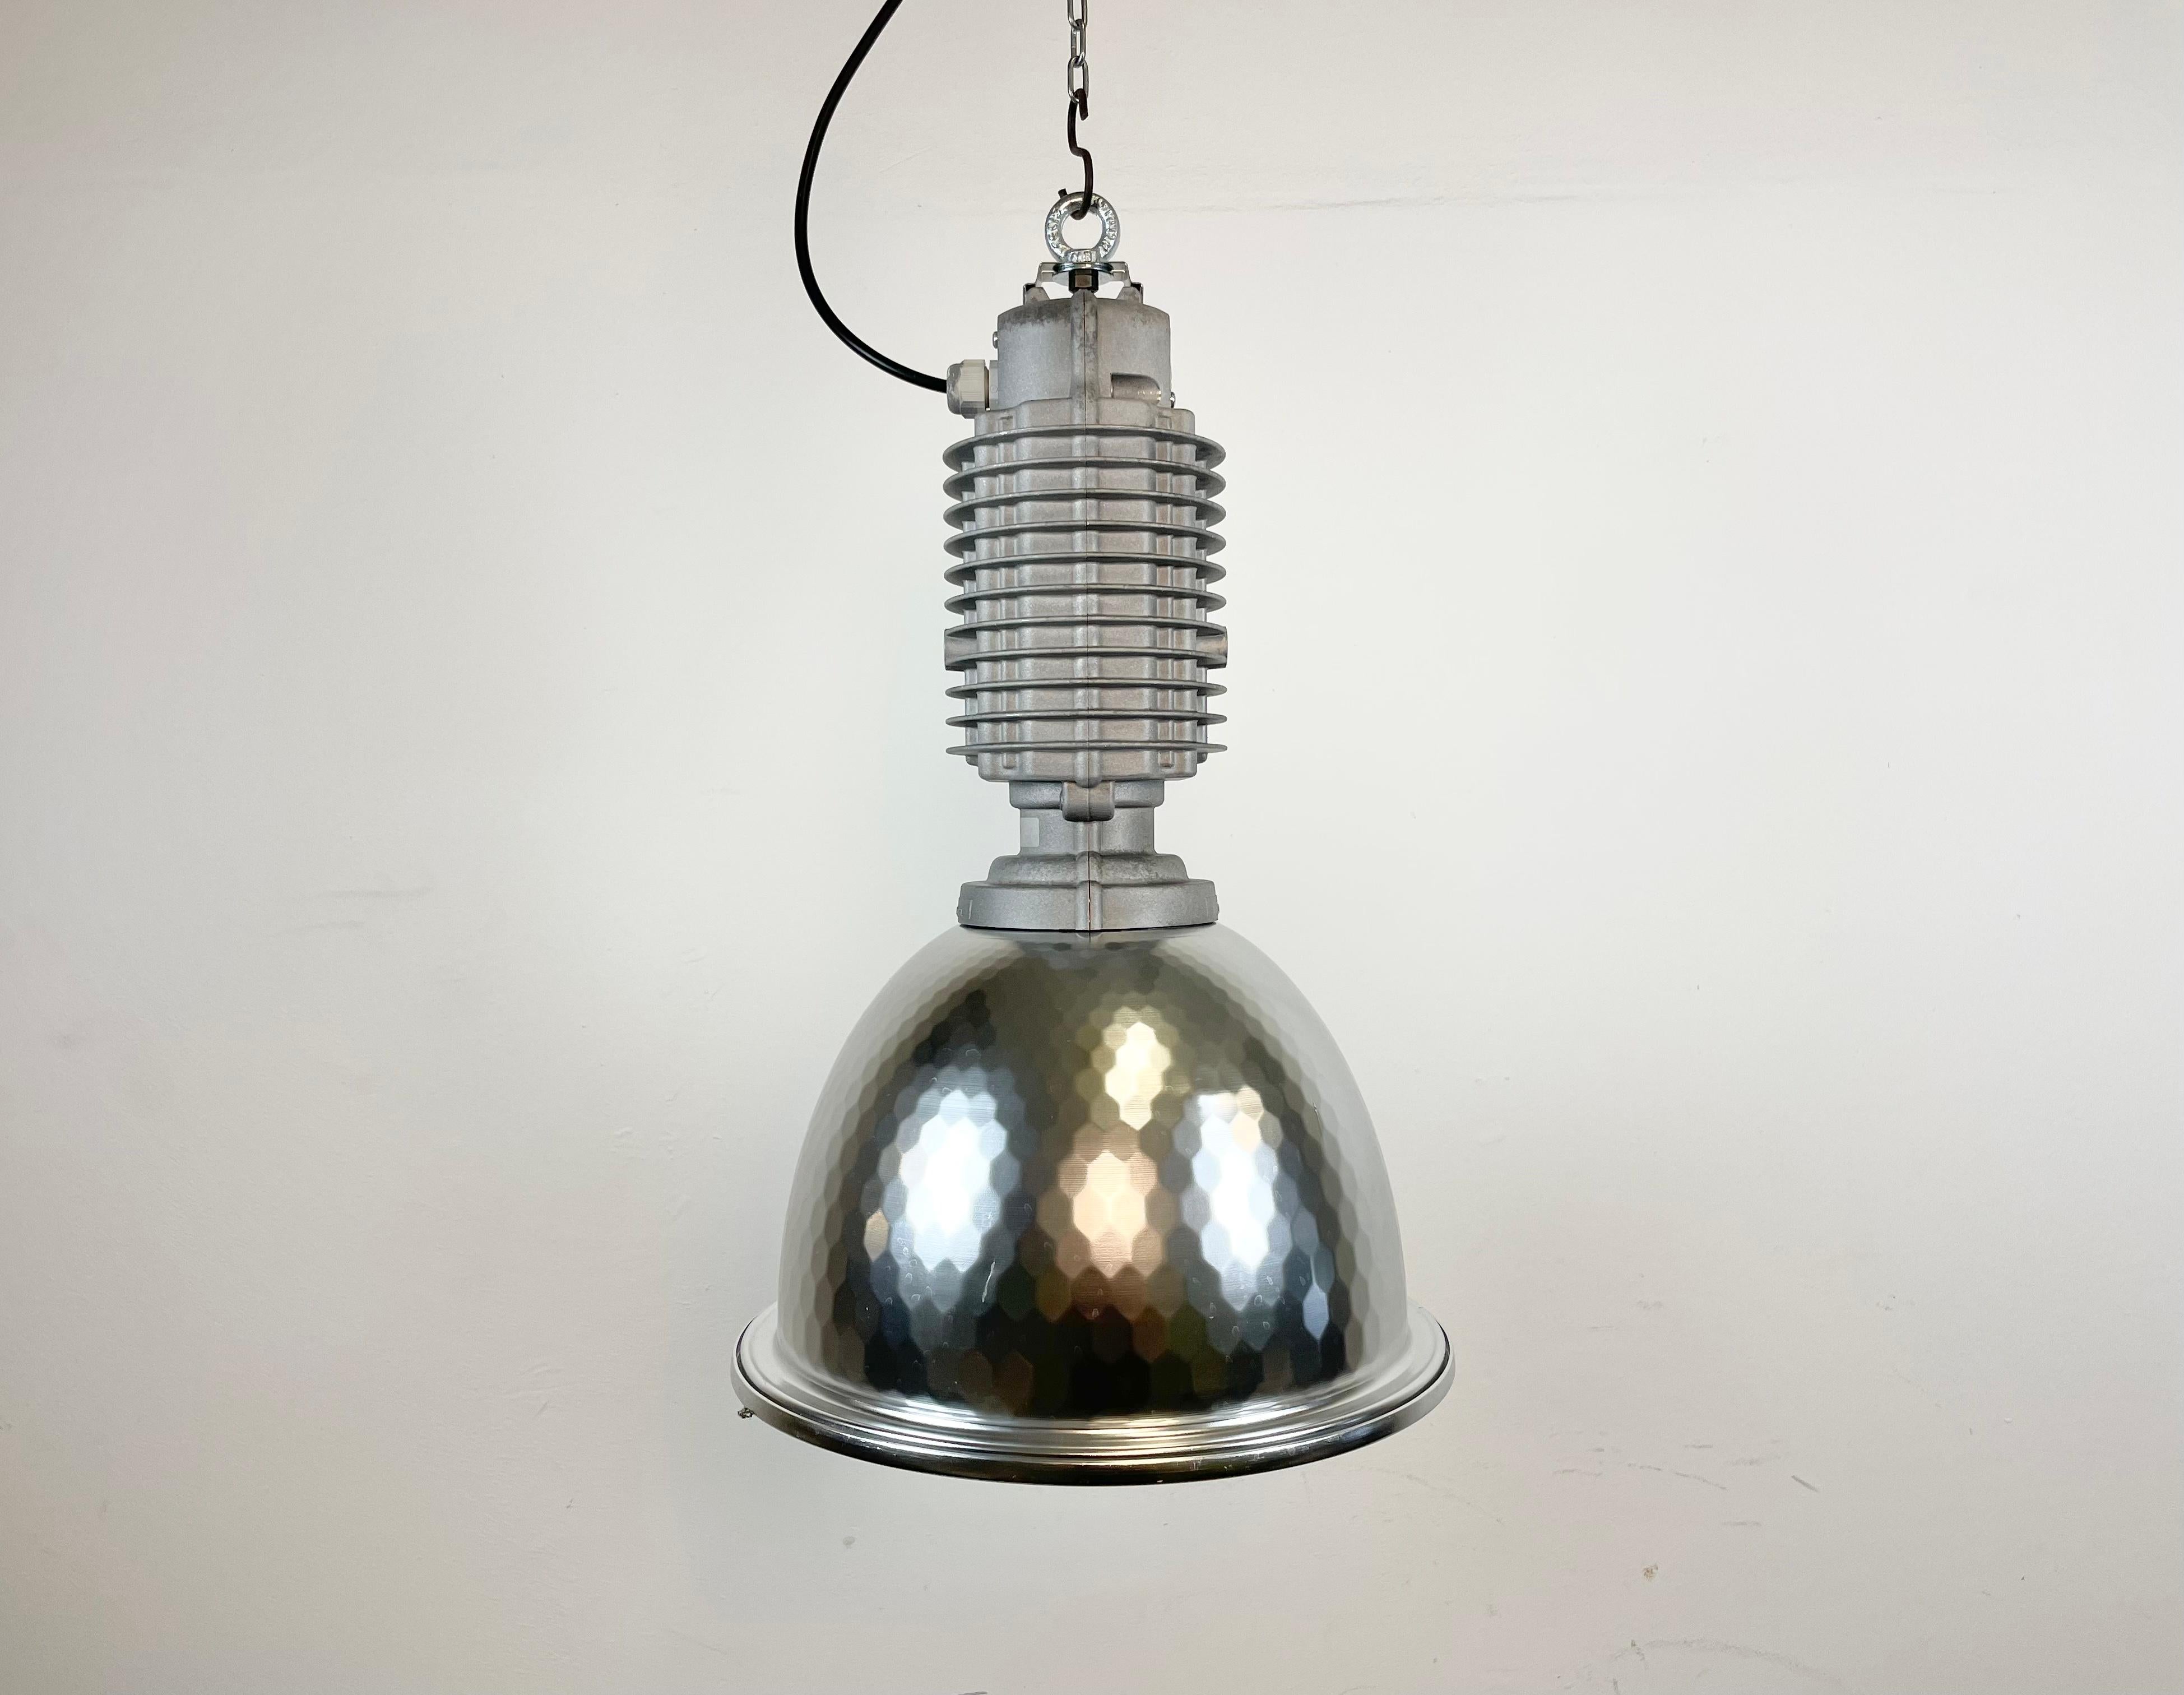 This industrial pendant lamp was designed by Charles Keller for Zumtobel Staff during the 1990s. It features a cast aluminum top and an aluminium shade. New porcelain socket for E27/ E26 lightbulb. New wire The diameter of the shade is 34 cm. It